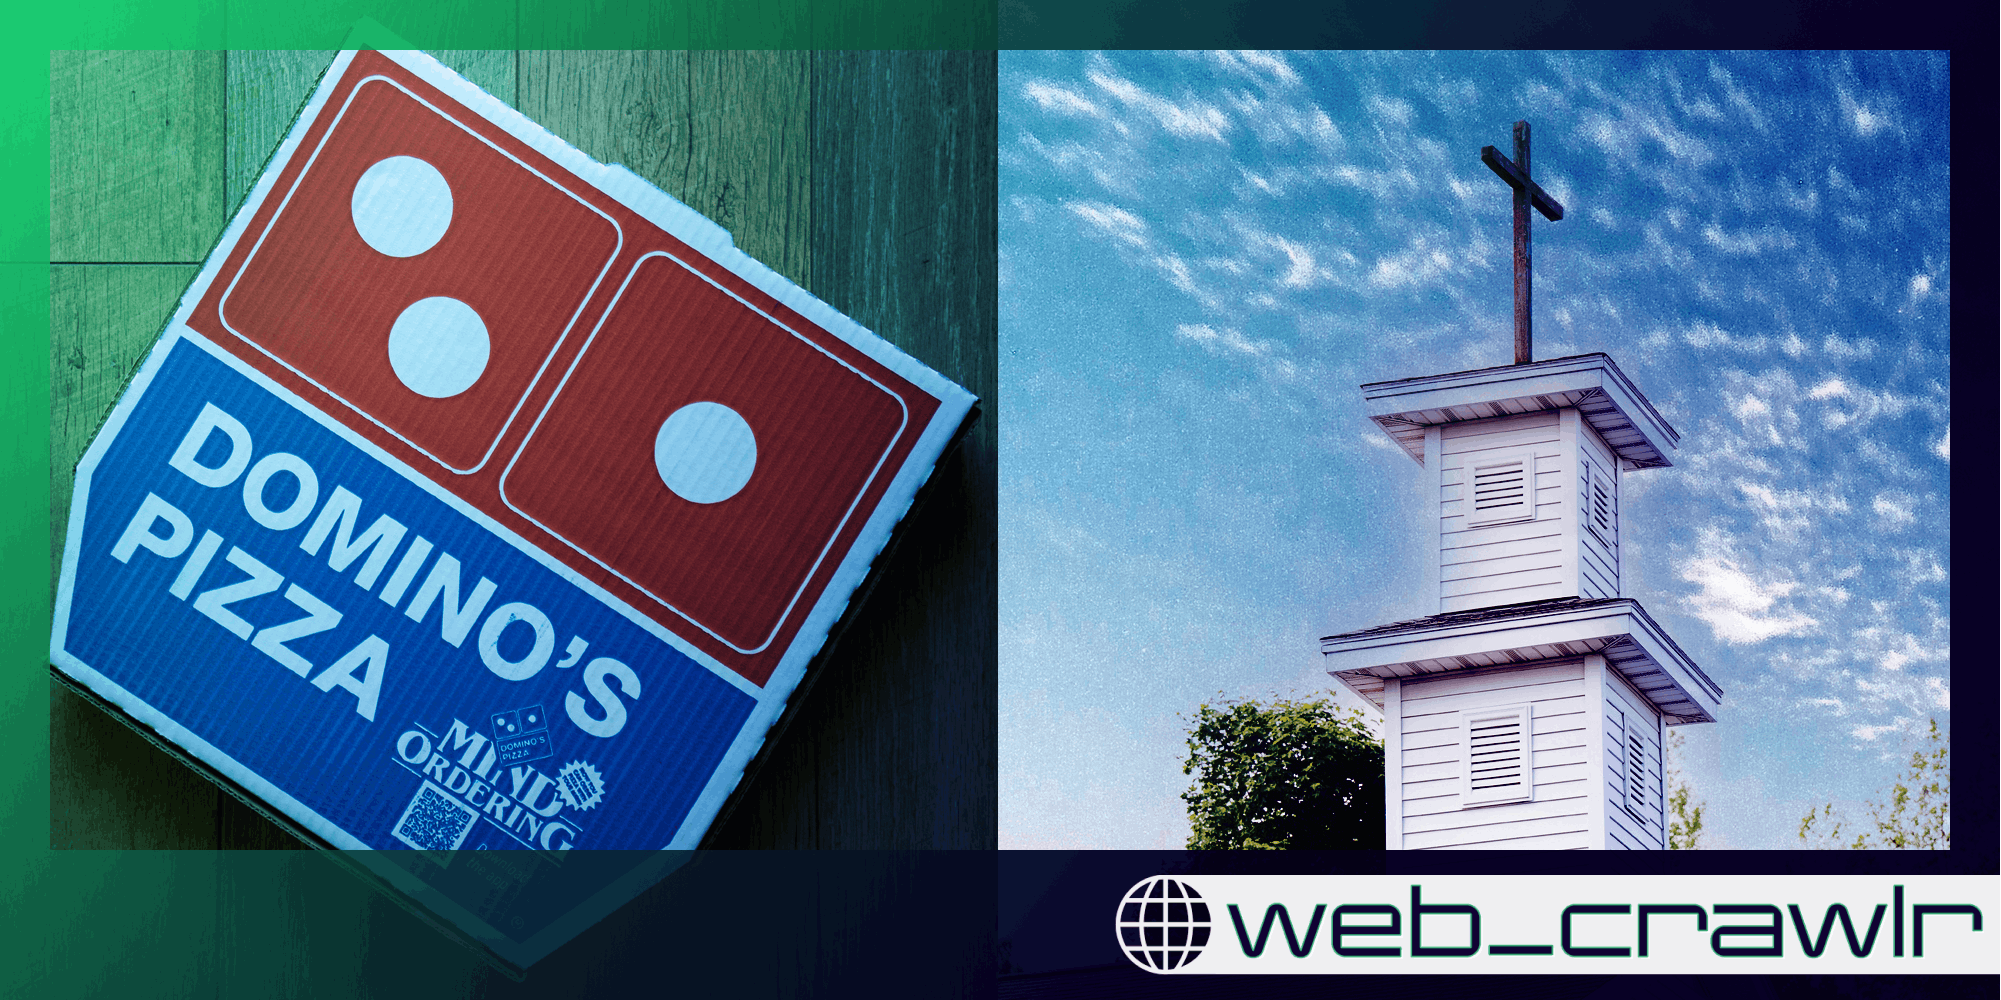 A box of Domino's Pizza next to a church. The Daily Dot newsletter web_crawlr logo is in the bottom right corner.